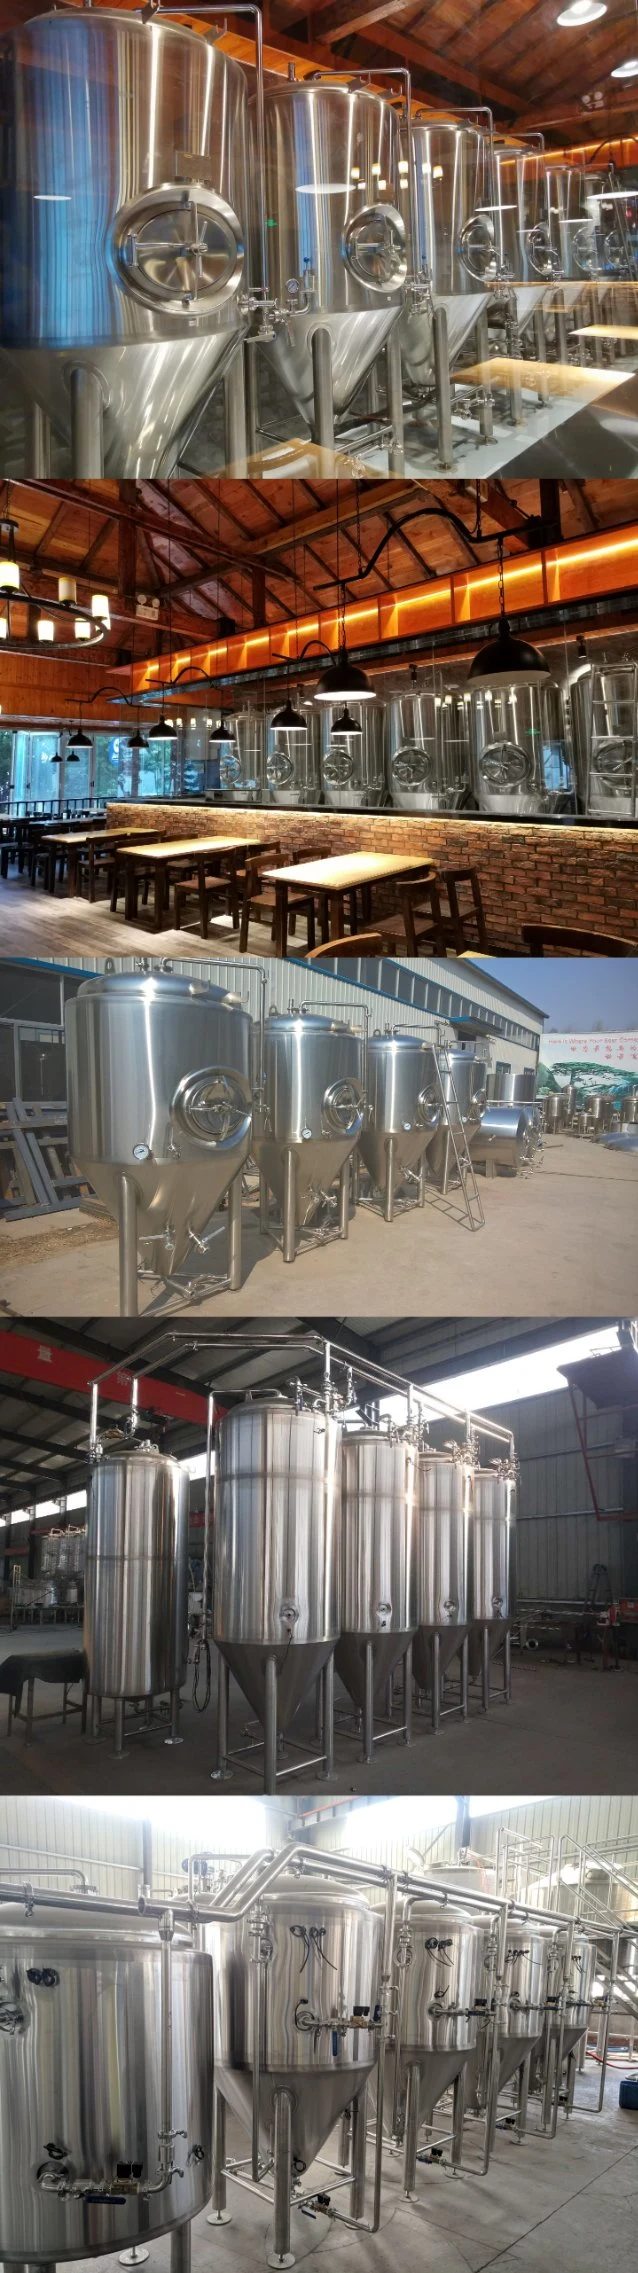 4bbl Craft Brewery Equipment 4 Barrel Beer Brewing System